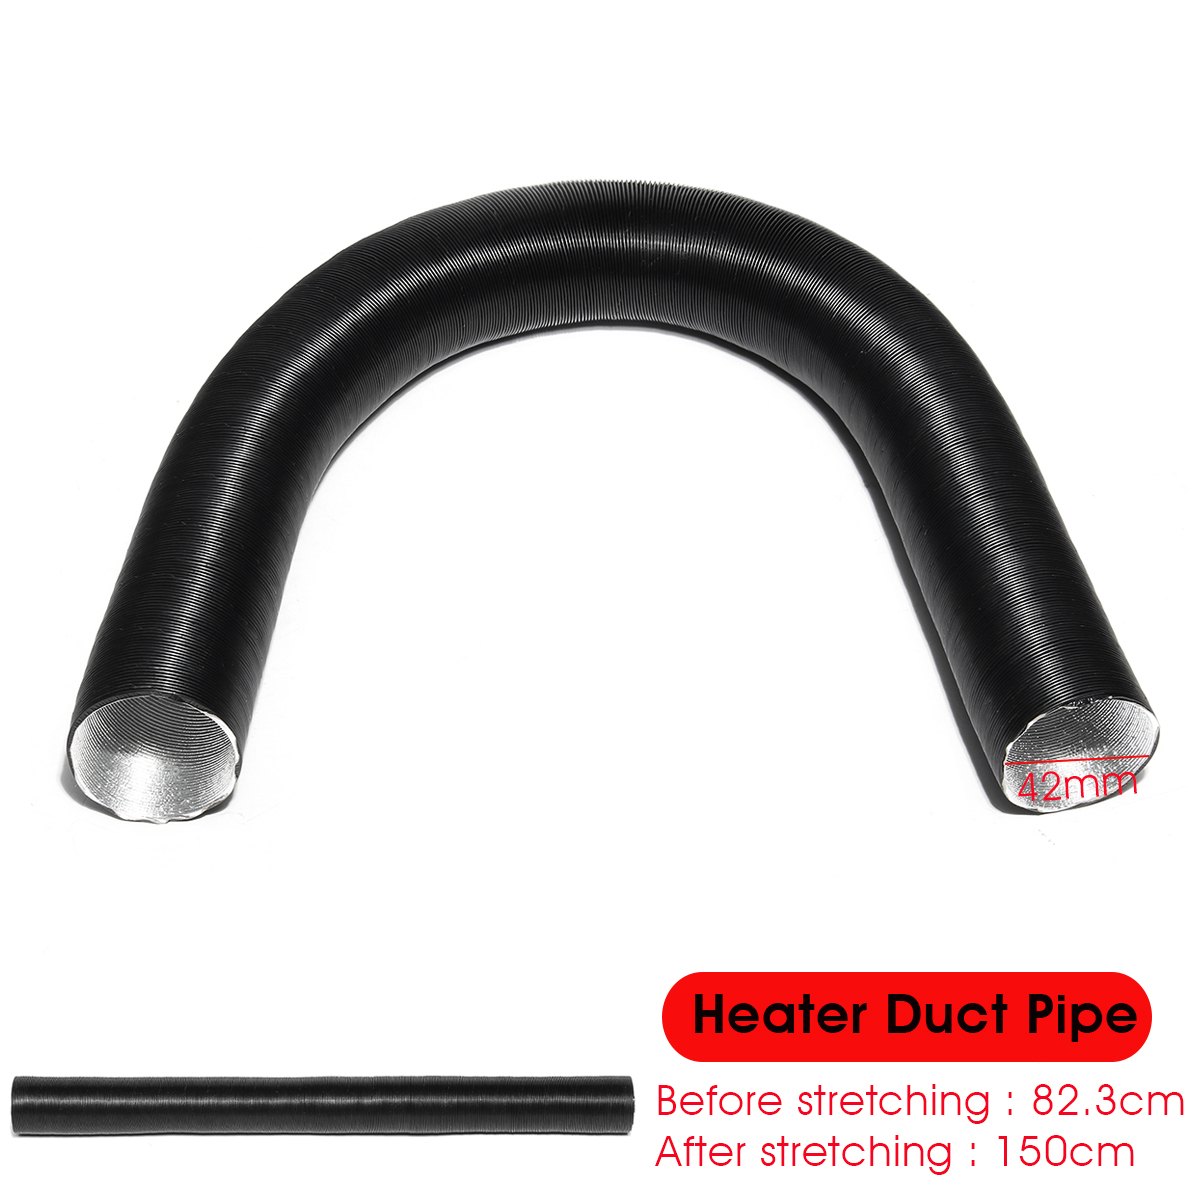 42mm-Outlet-Tube-Heater-Duct-Pipe-Air-Ducting-For-Air-Diesel-Heater-4-holes-Car-Truck-1632314-6